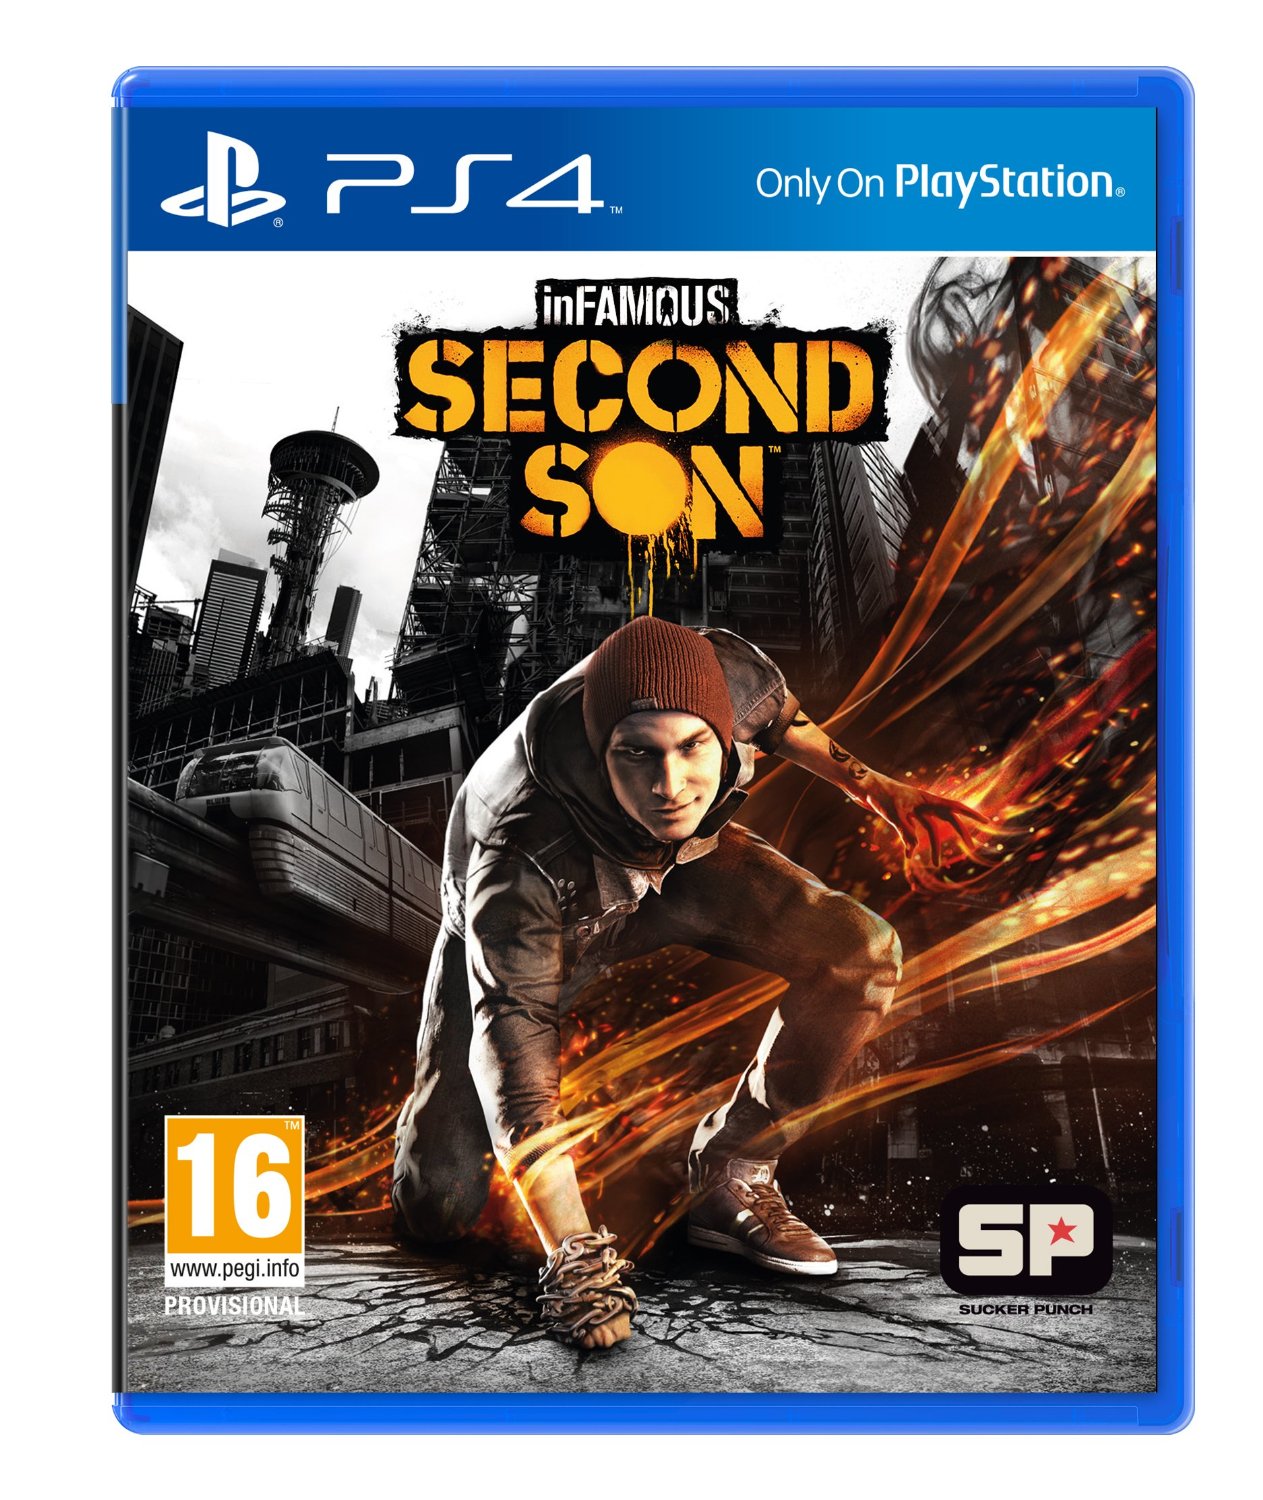 inFAMOUS: Second Son PS4